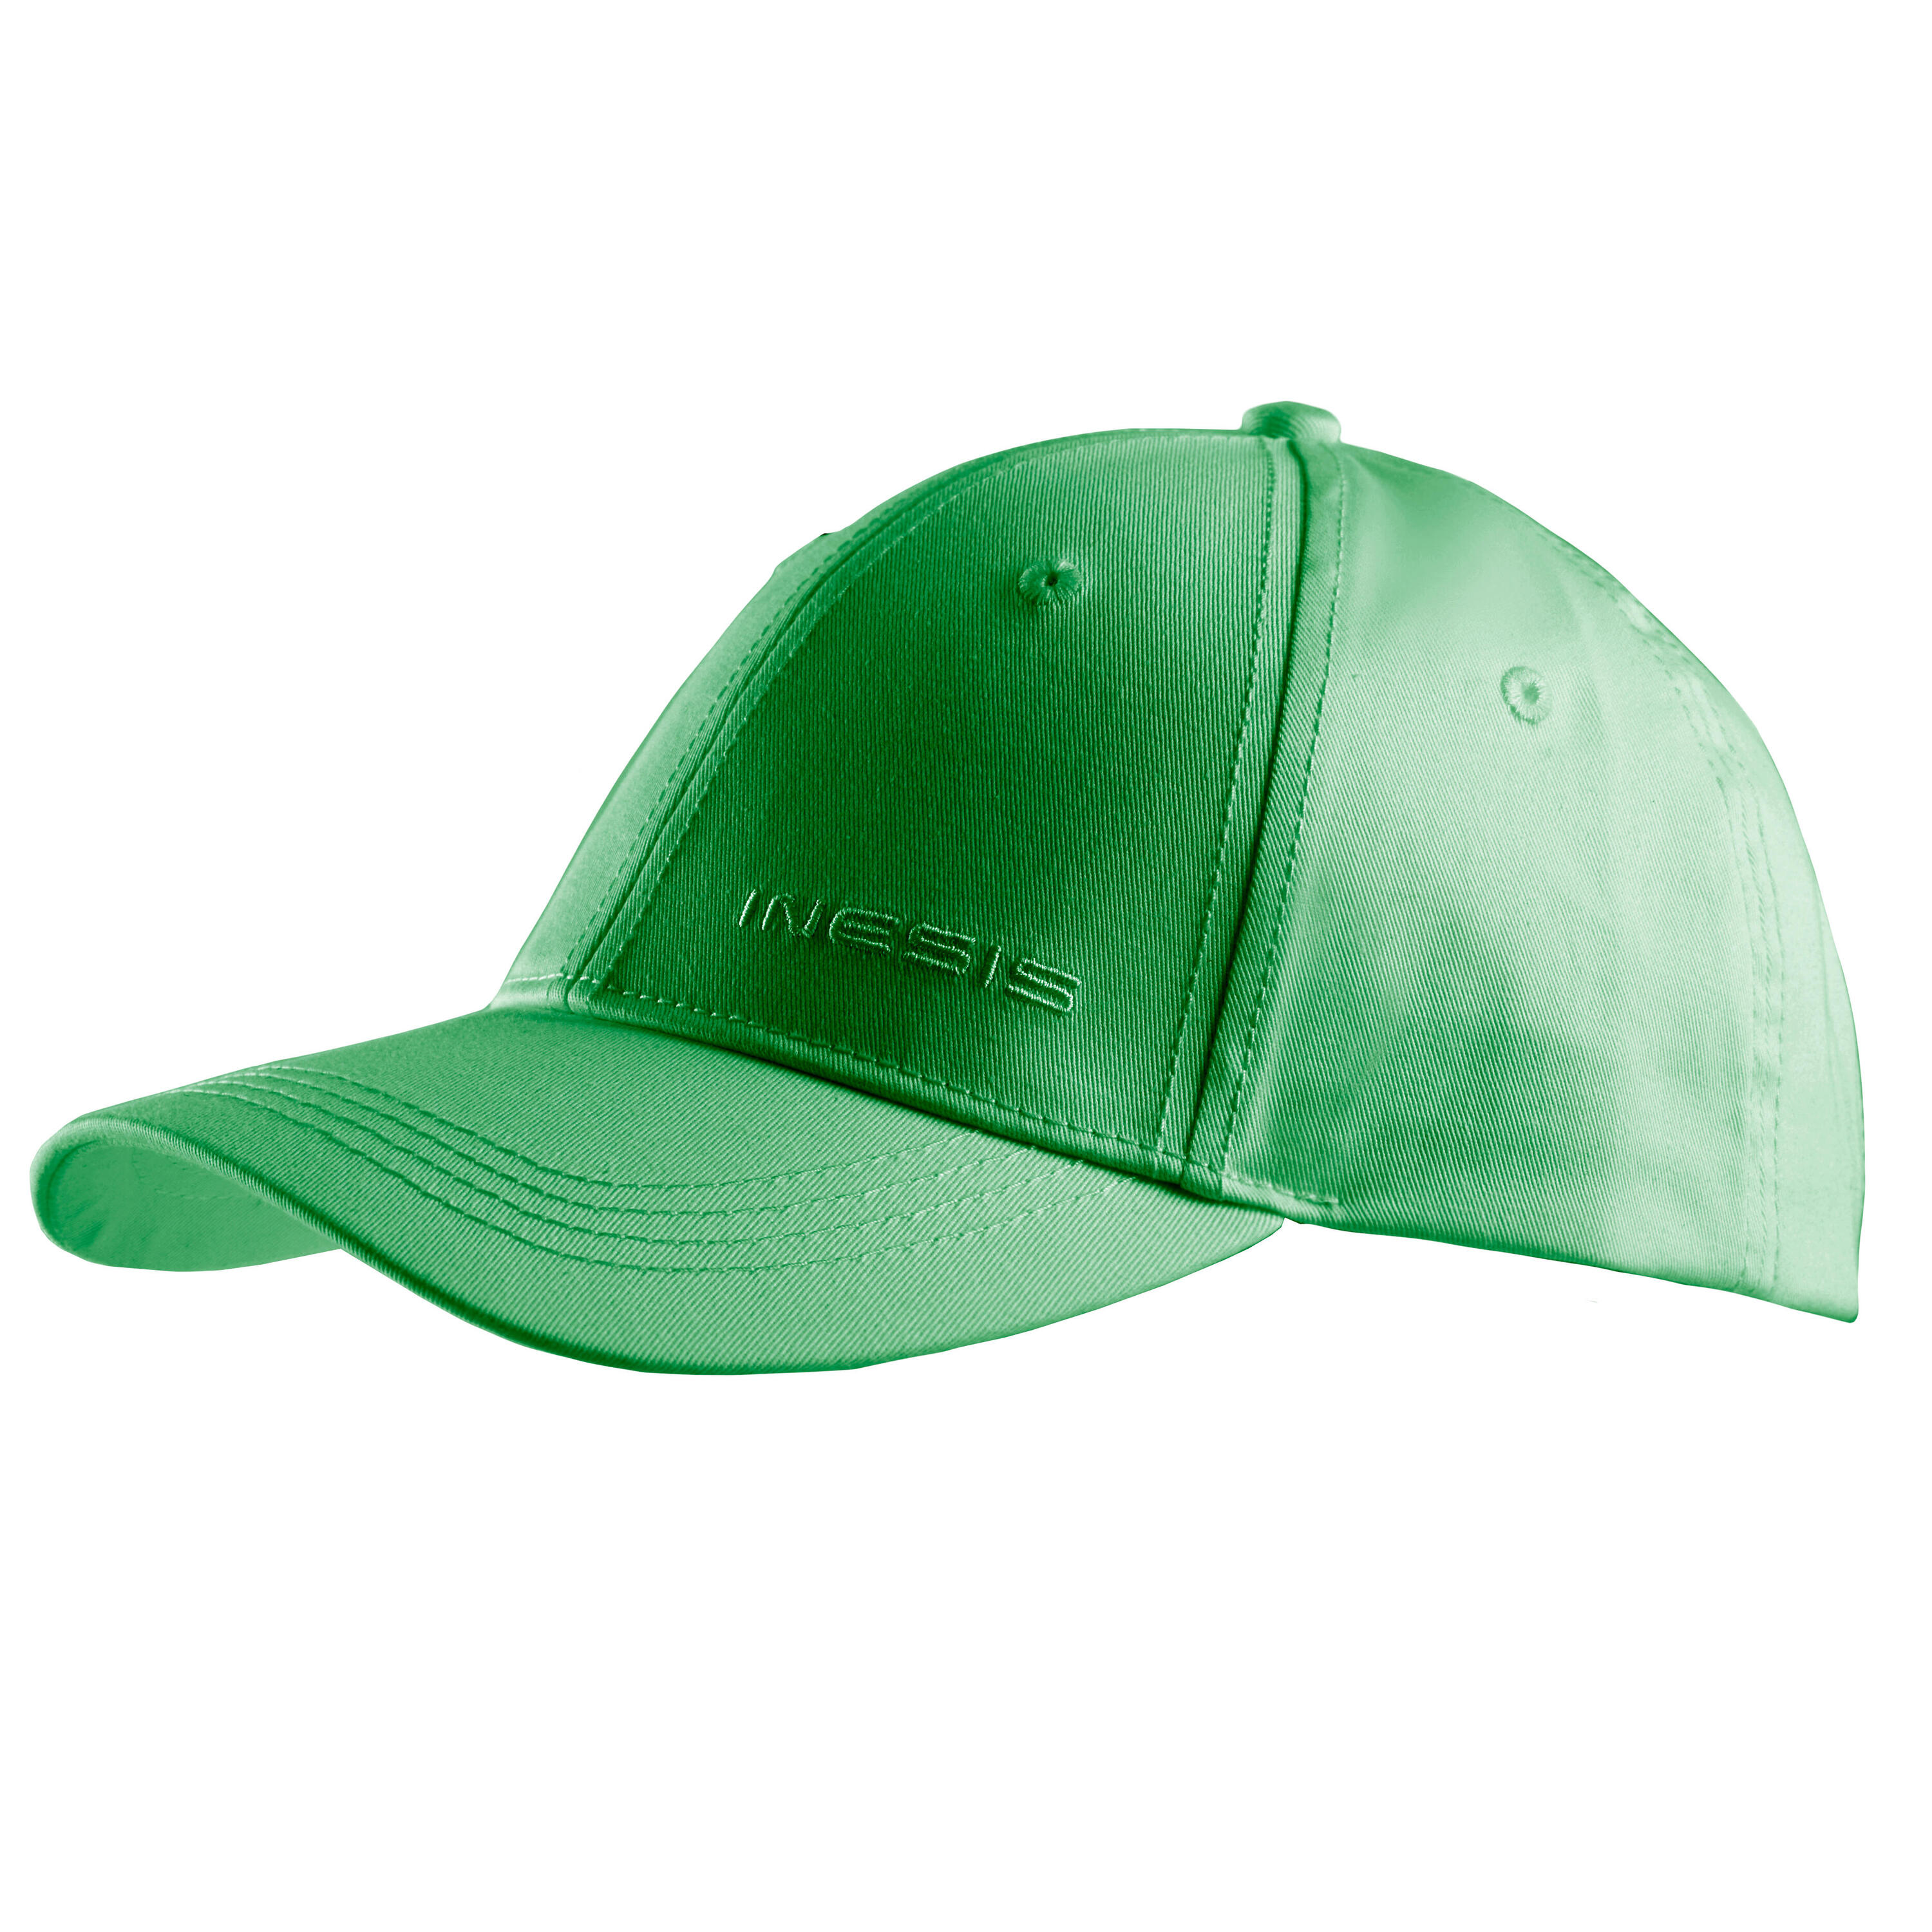 INESIS Adult's golf cap - MW 500 forest green